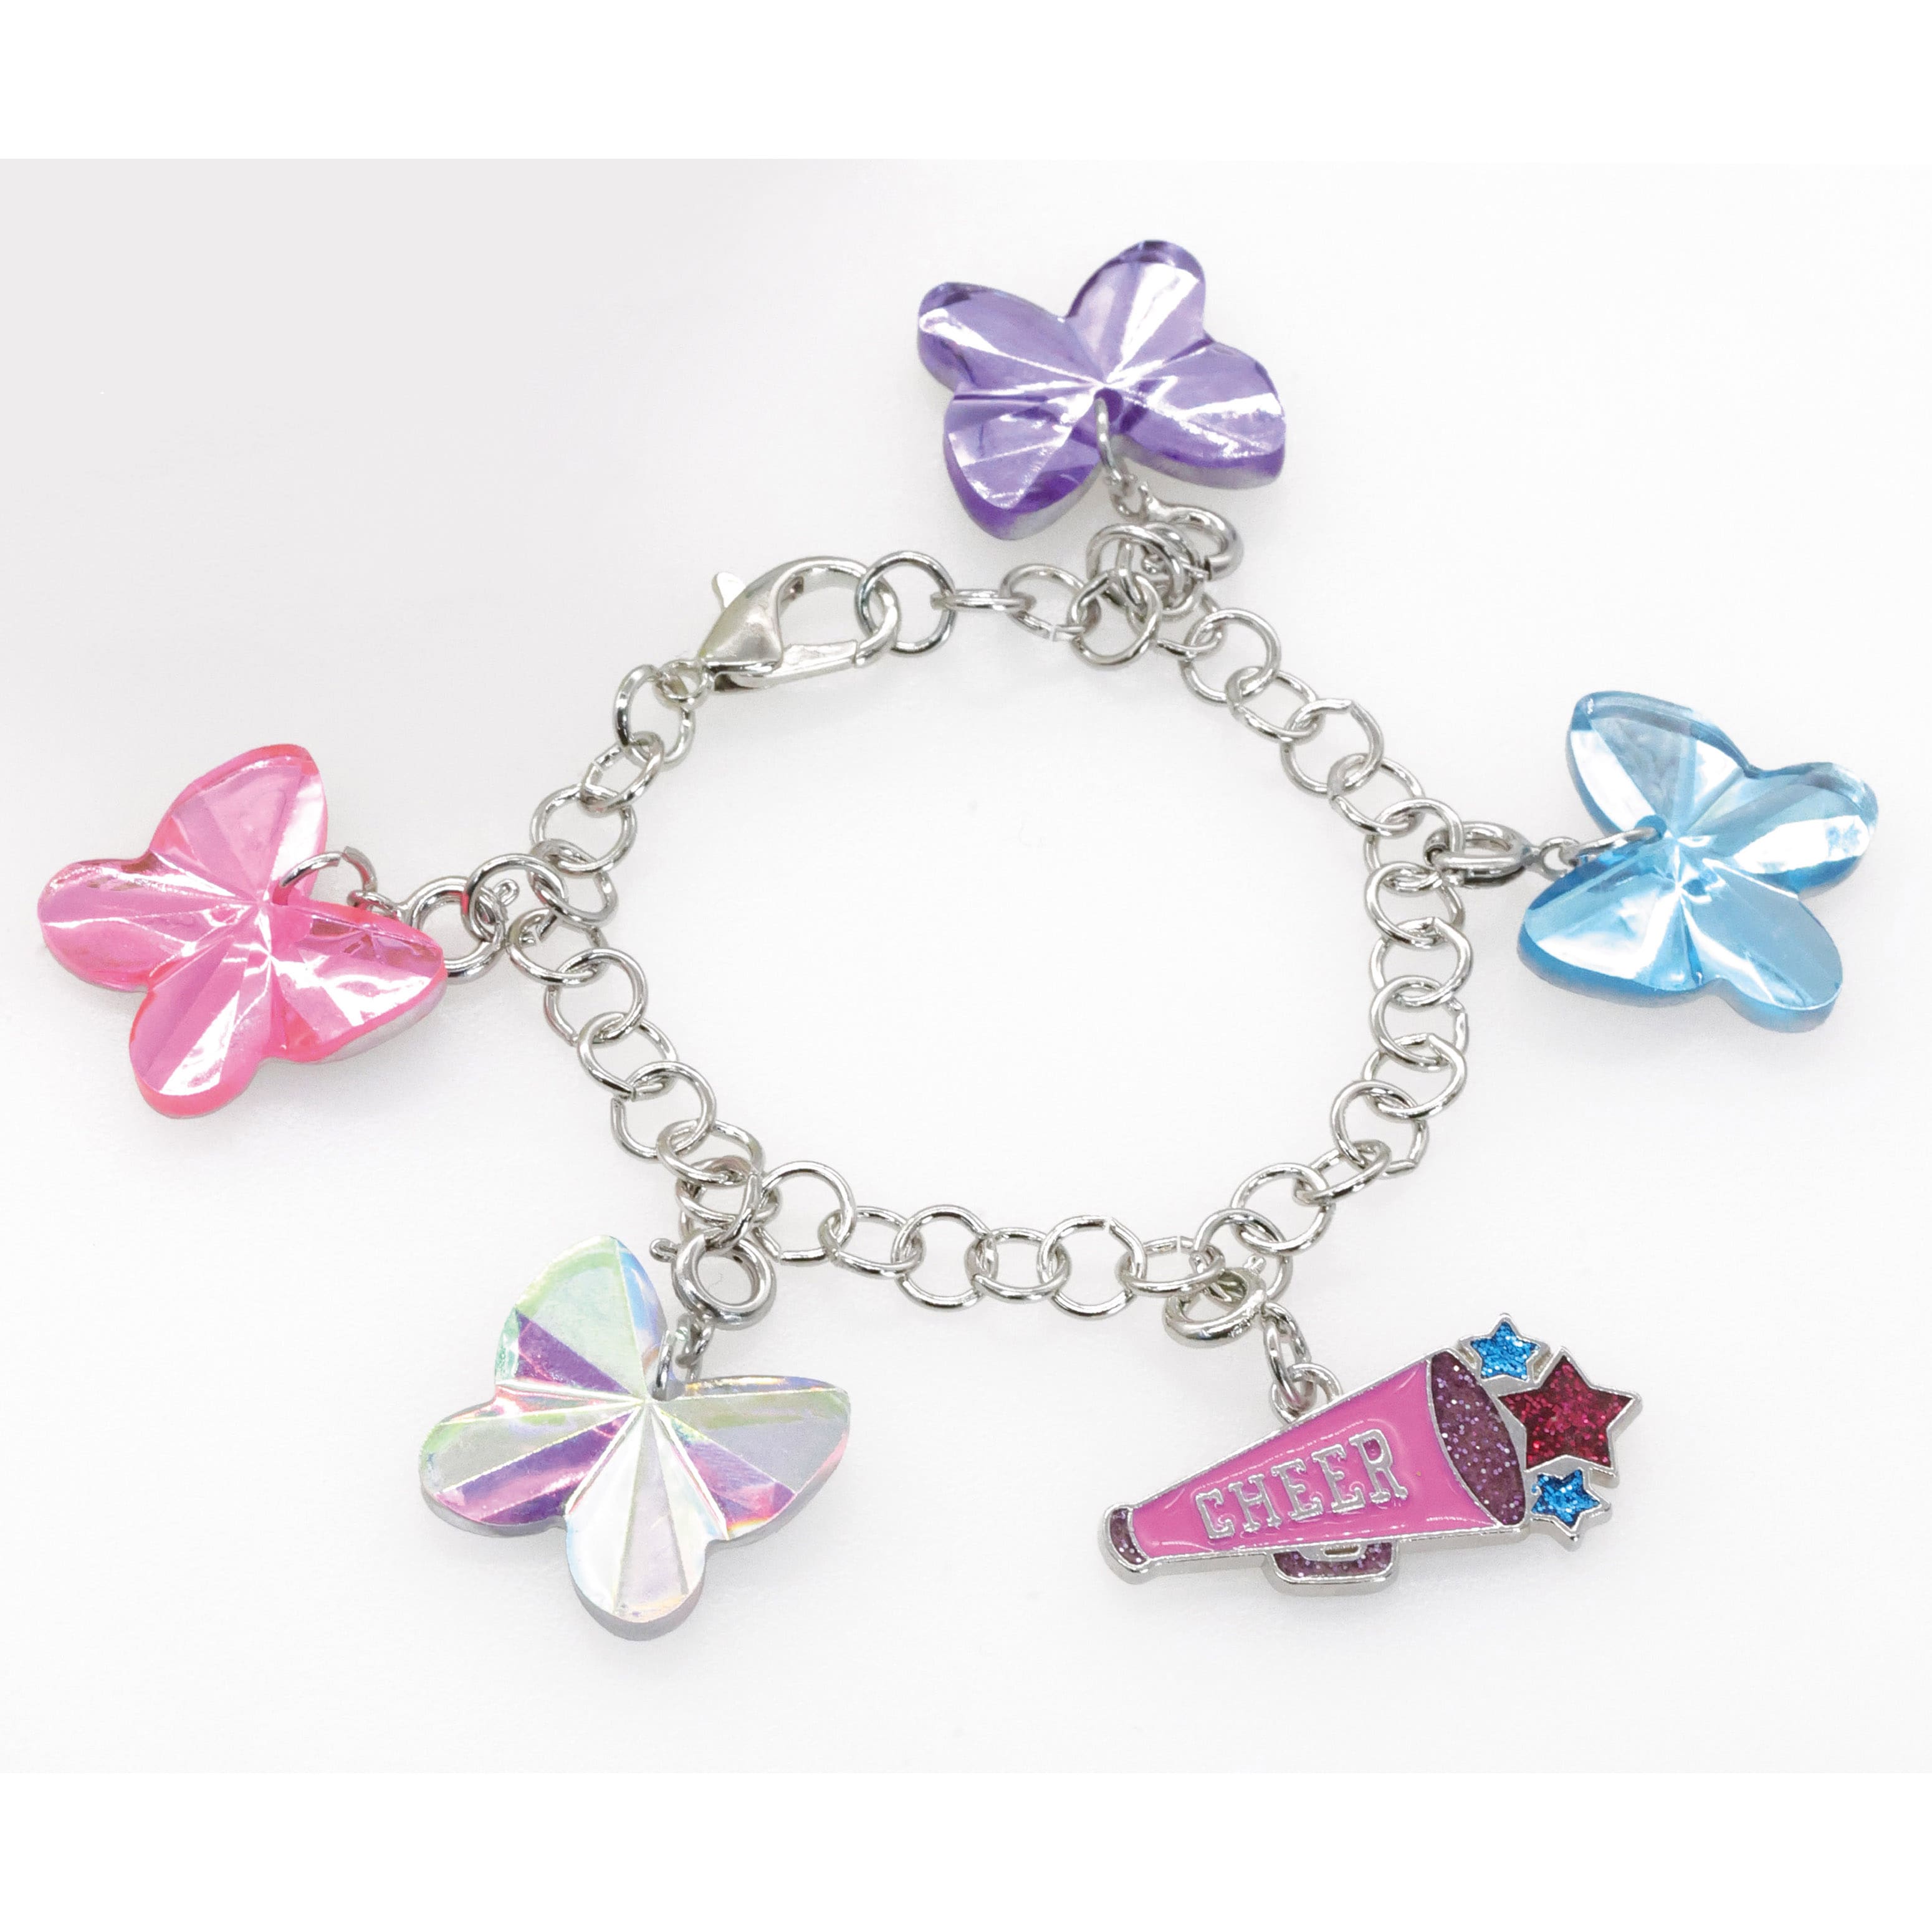 Butterfly Charms by Creatology&#x2122;, 4ct.